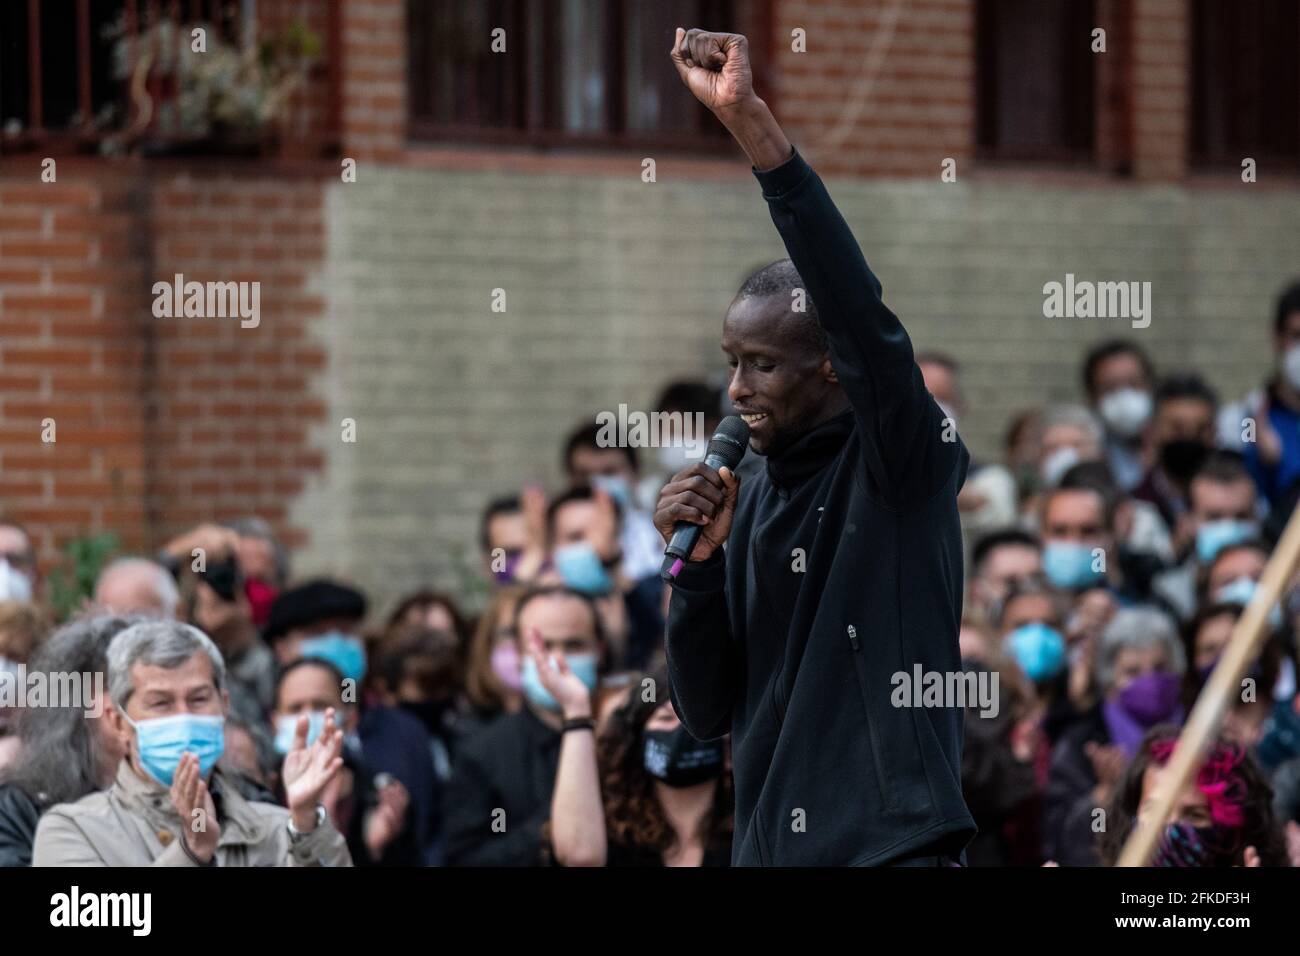 Madrid, Spain. 30th Apr, 2021. Serigne Mbaye, number 9 of Unidas Podemos for the elections to the Assembly of Madrid, during a rally in Vallecas neighborhood. Unidas Podemos continue to present their candidature for the next regional elections of Madrid that will take place on the 4th of May 2021. Credit: Marcos del Mazo/Alamy Live News Stock Photo